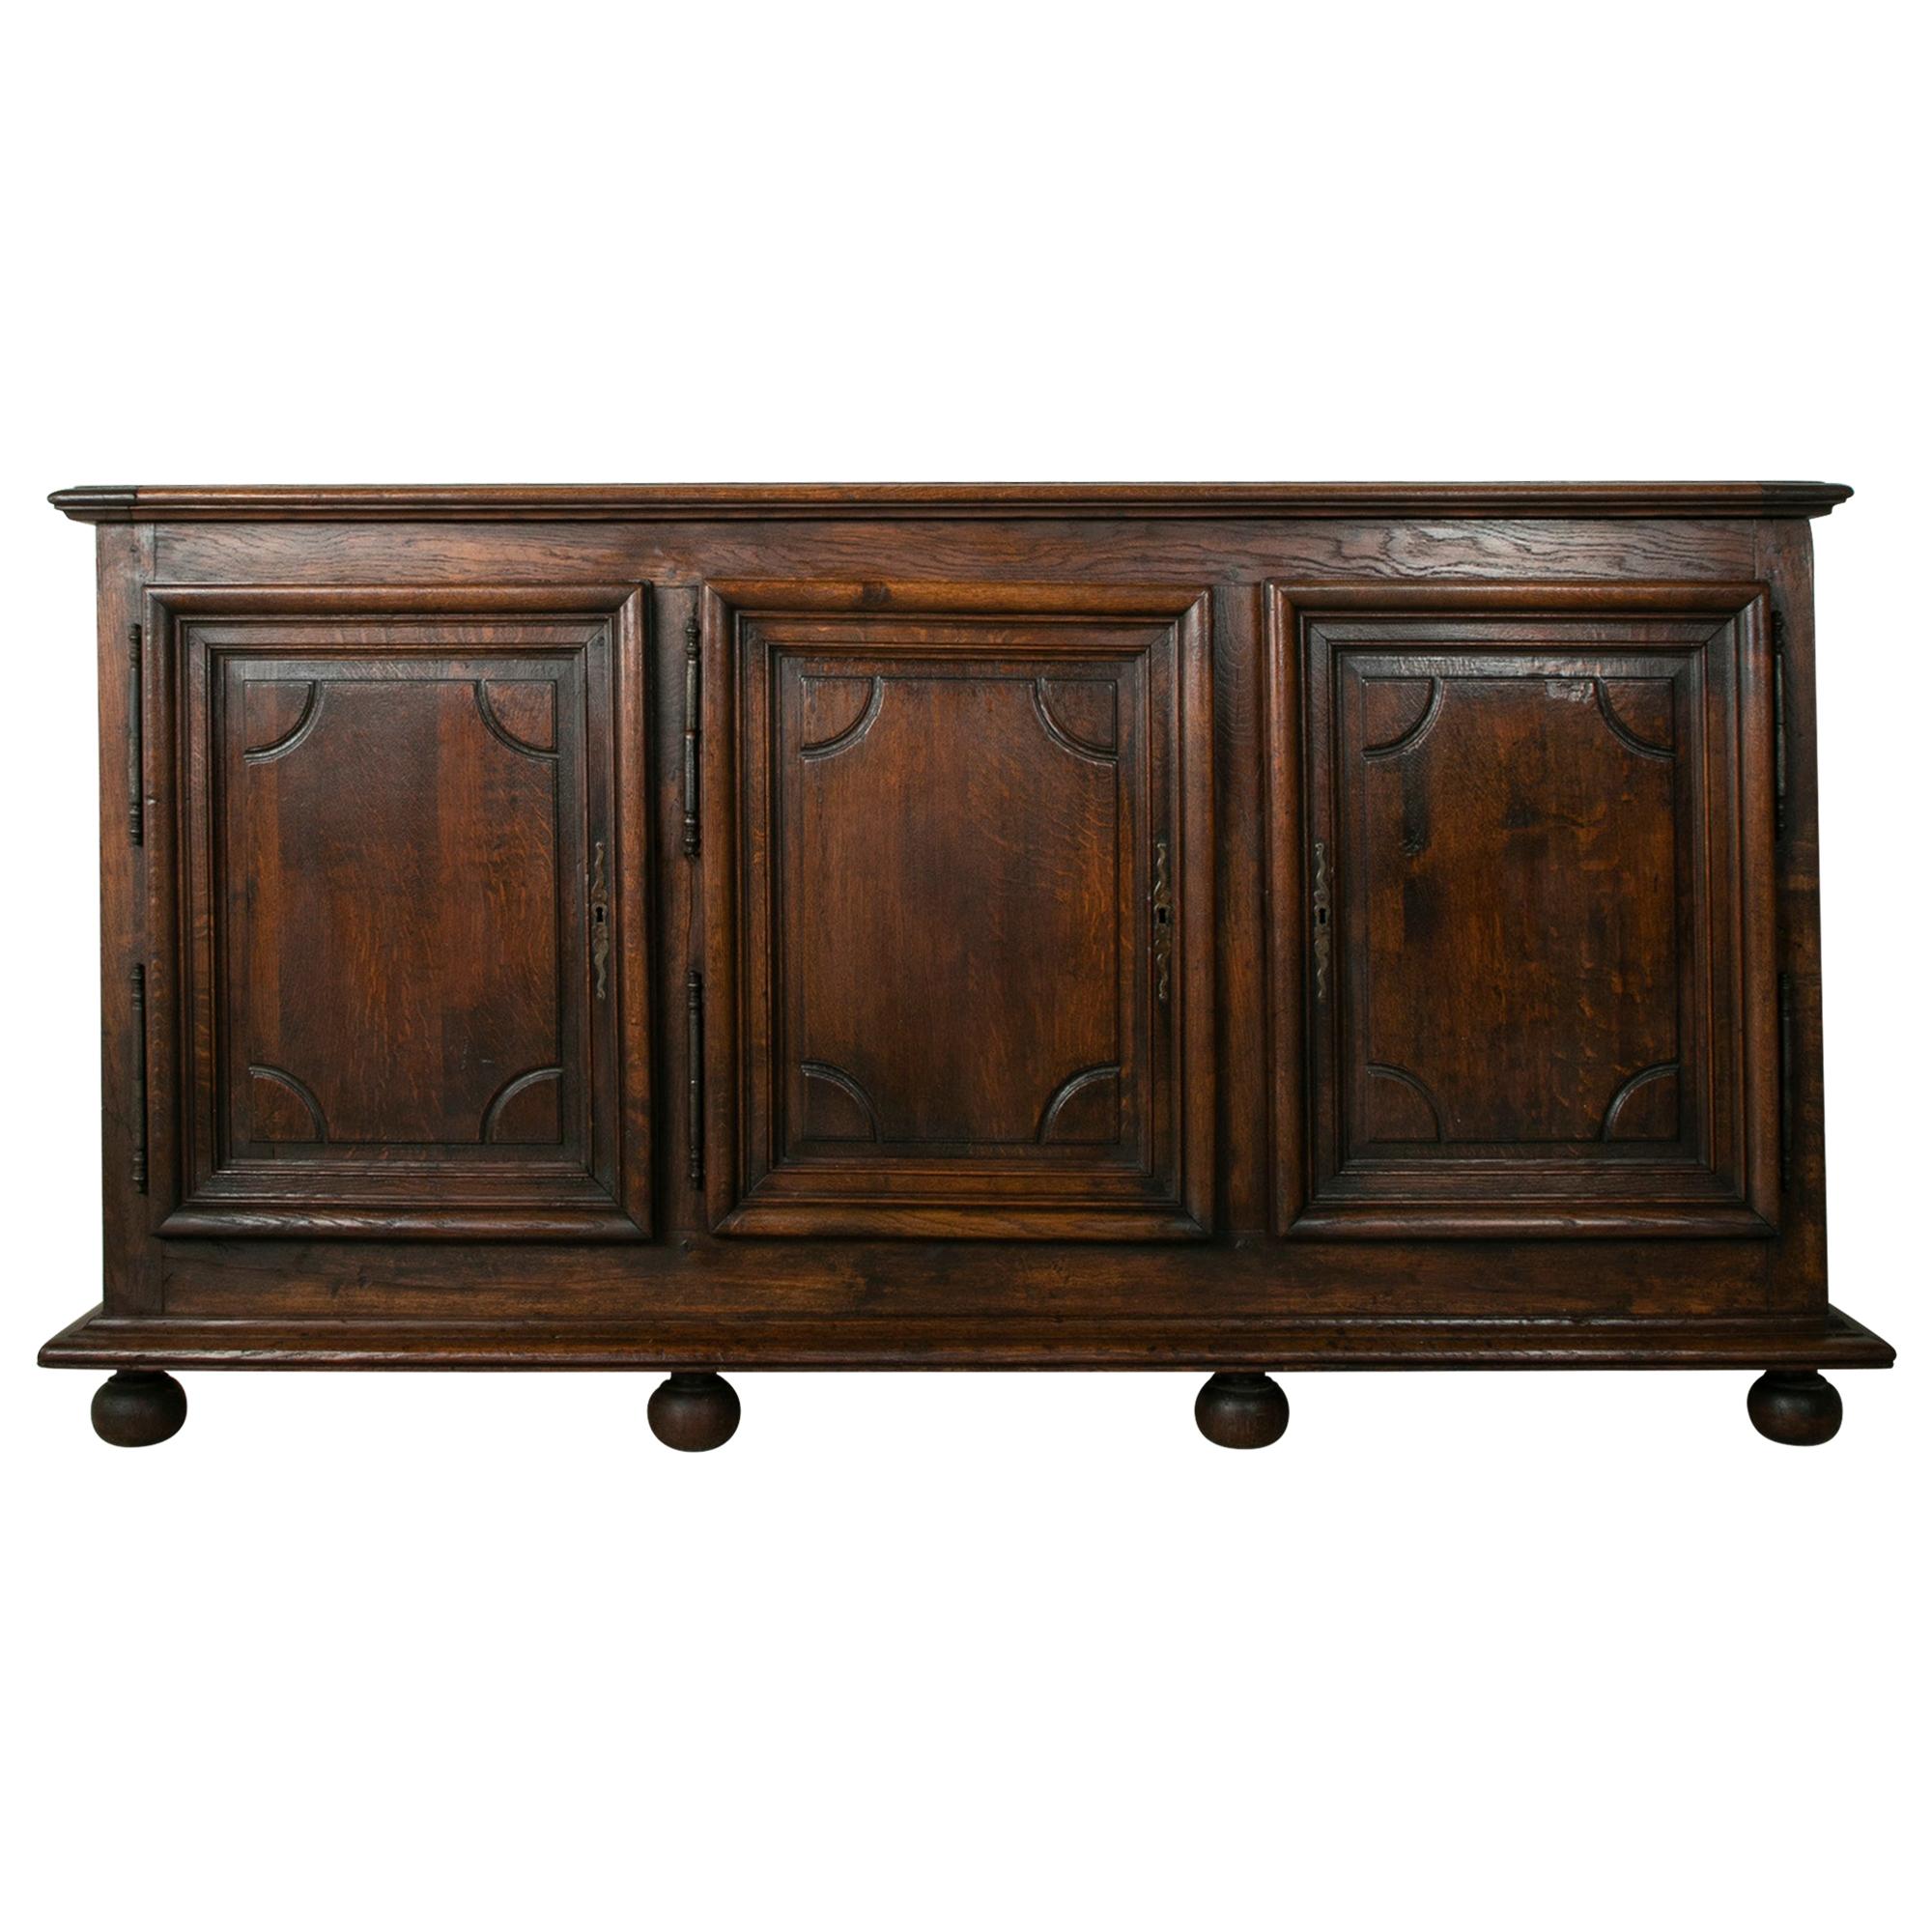 Late 18th Century French Louis XIV Style Oak Enfilade, Sideboard, or Buffet